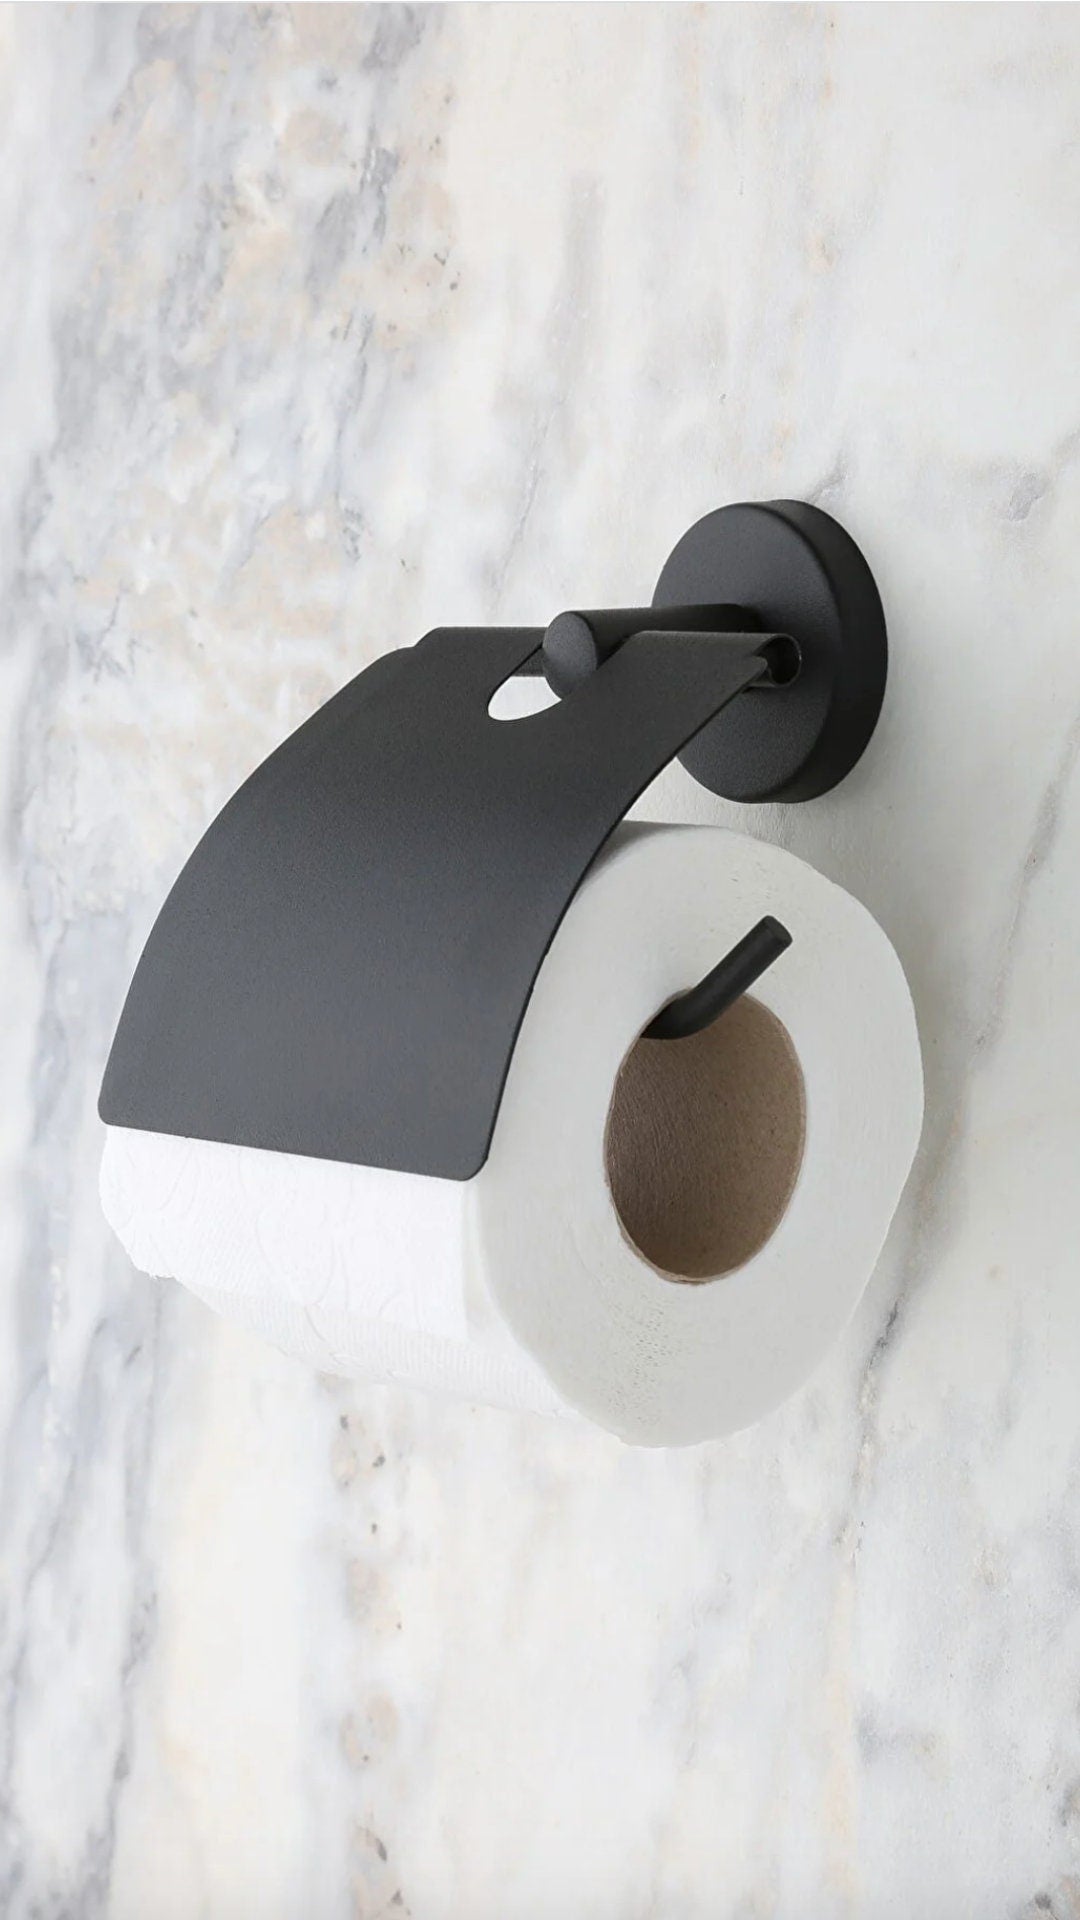 Wall Mounted Black Toilet Paper Holder, Wc Paper Holder, Bathroom Accessories, Bathroom Decoration, Black and Silver - Babila Home